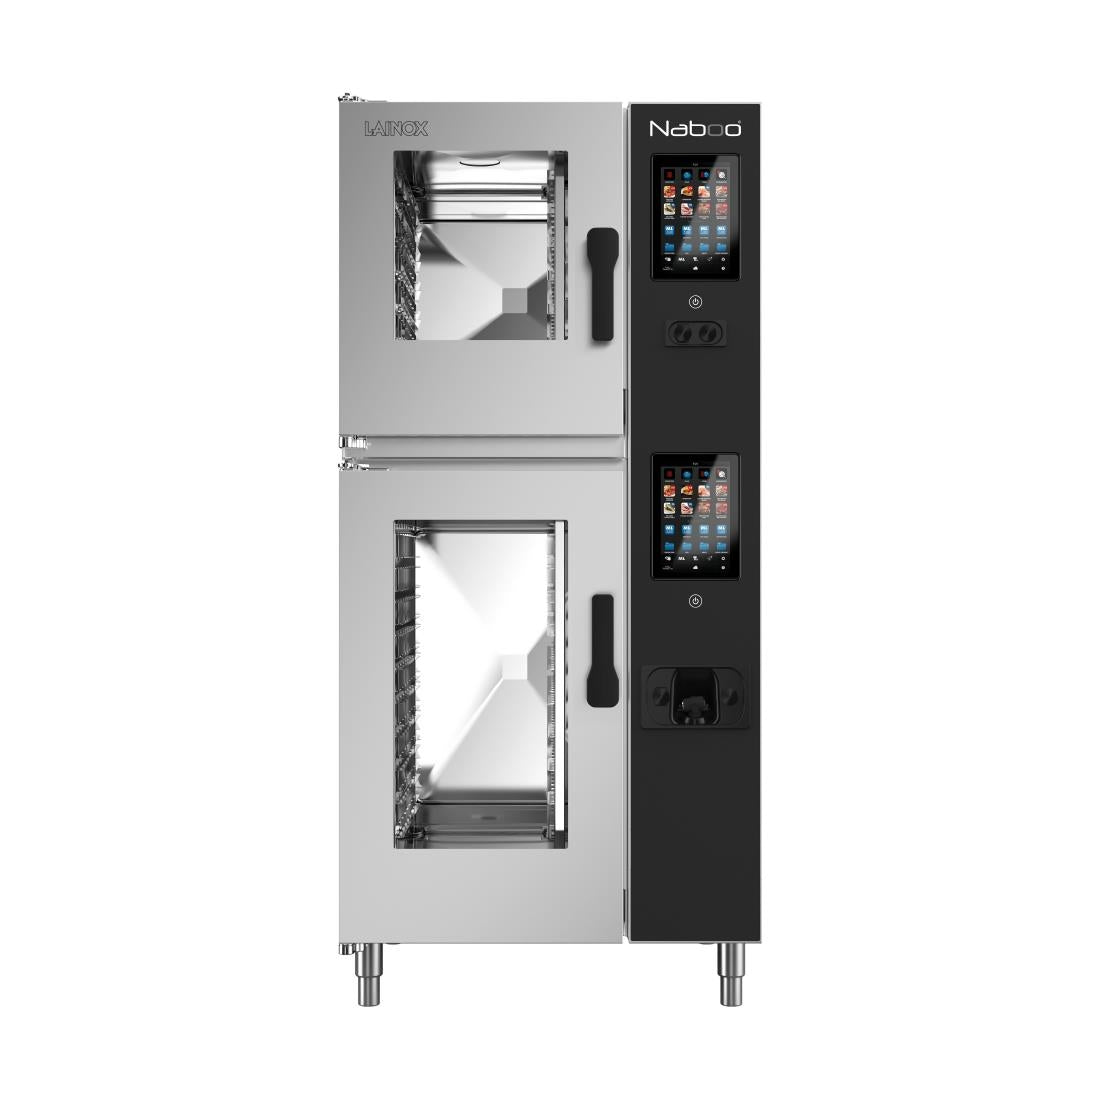 HP542 Lainox Naboo Boosted Electric Touch Screen Combi Oven NAE161BS 16X1/1GN JD Catering Equipment Solutions Ltd